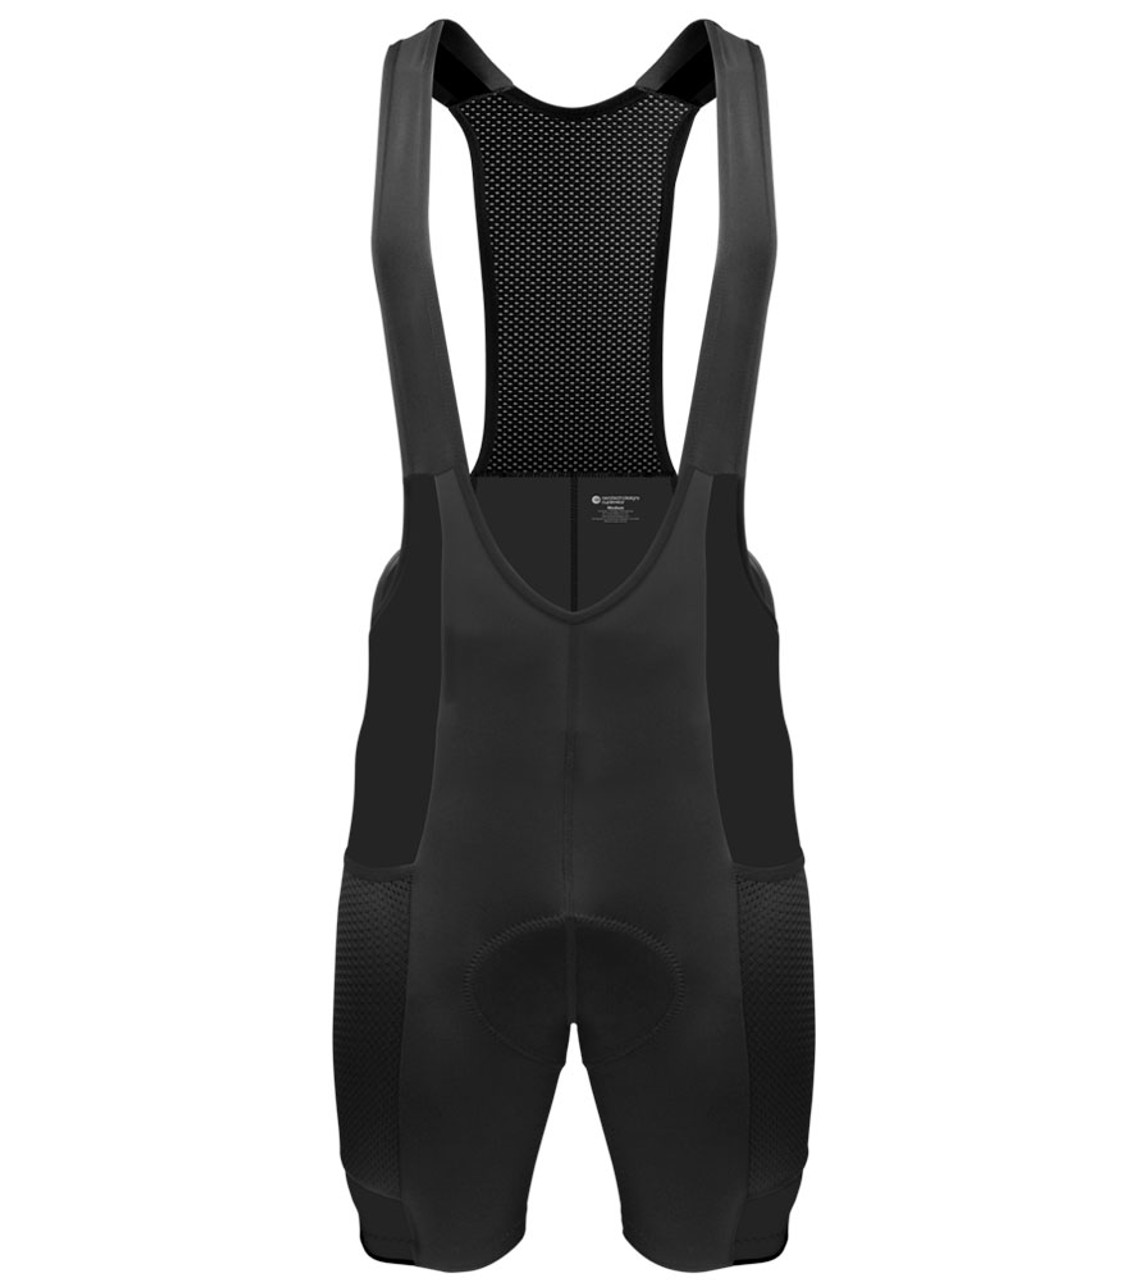 Men's Gel Touring Cycling Bib-Shorts | Bibs with Pockets | Made in USA